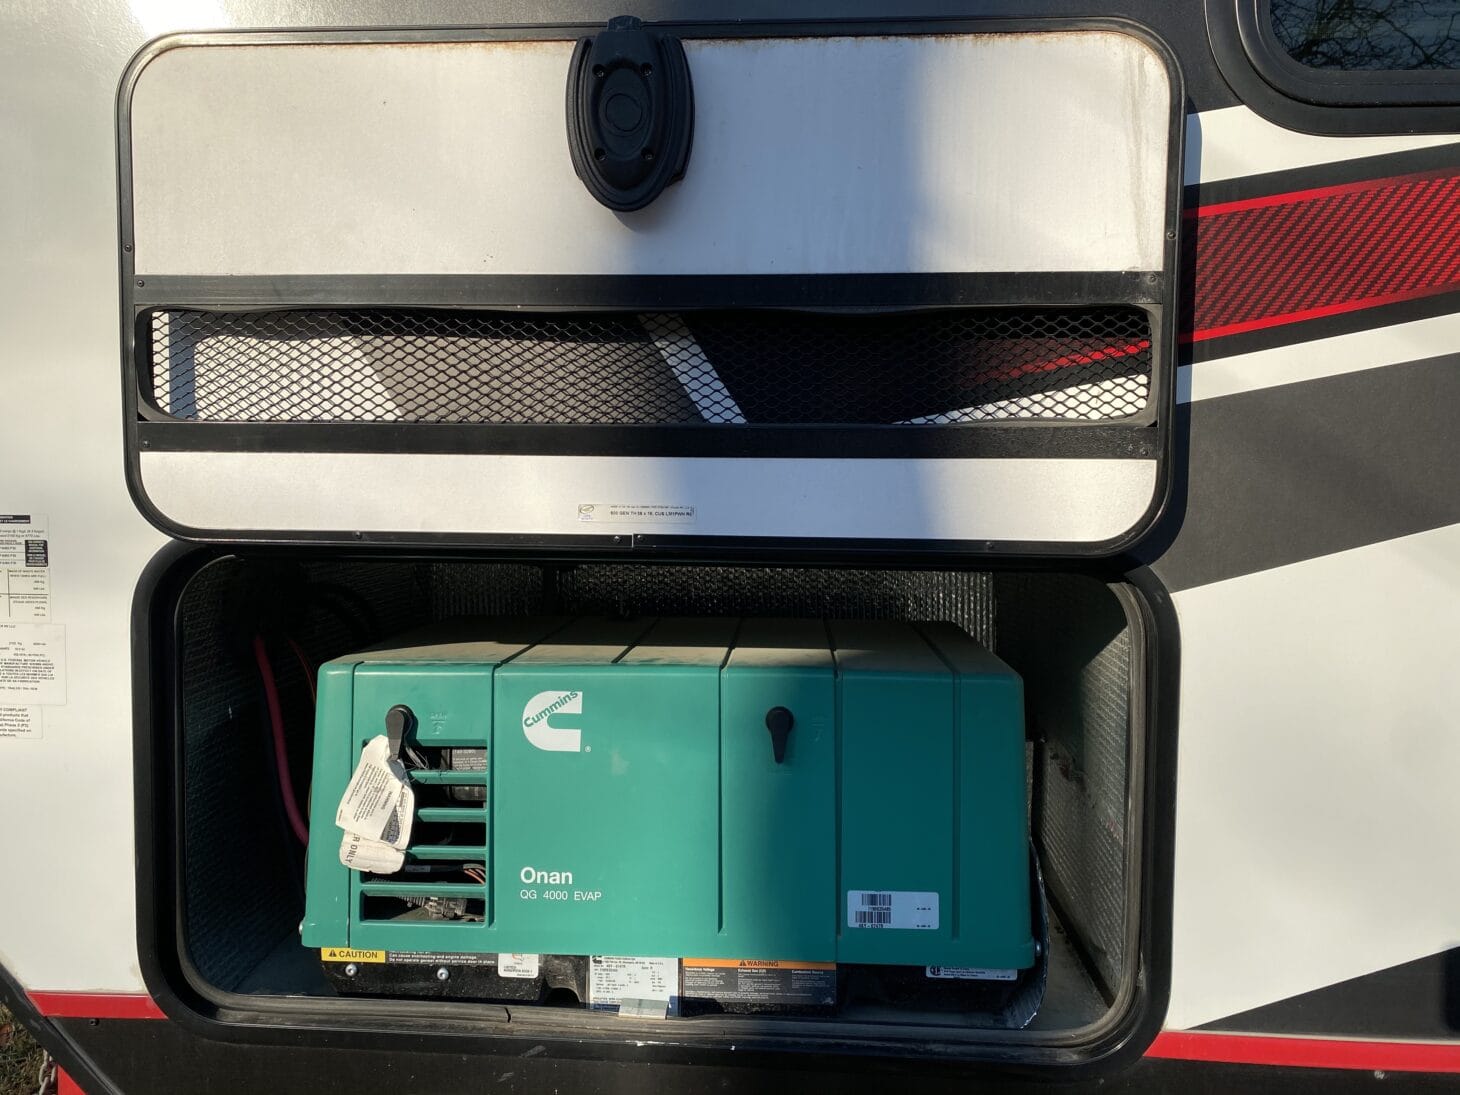 Generator sitting inside the exterior cargo bay of an RV